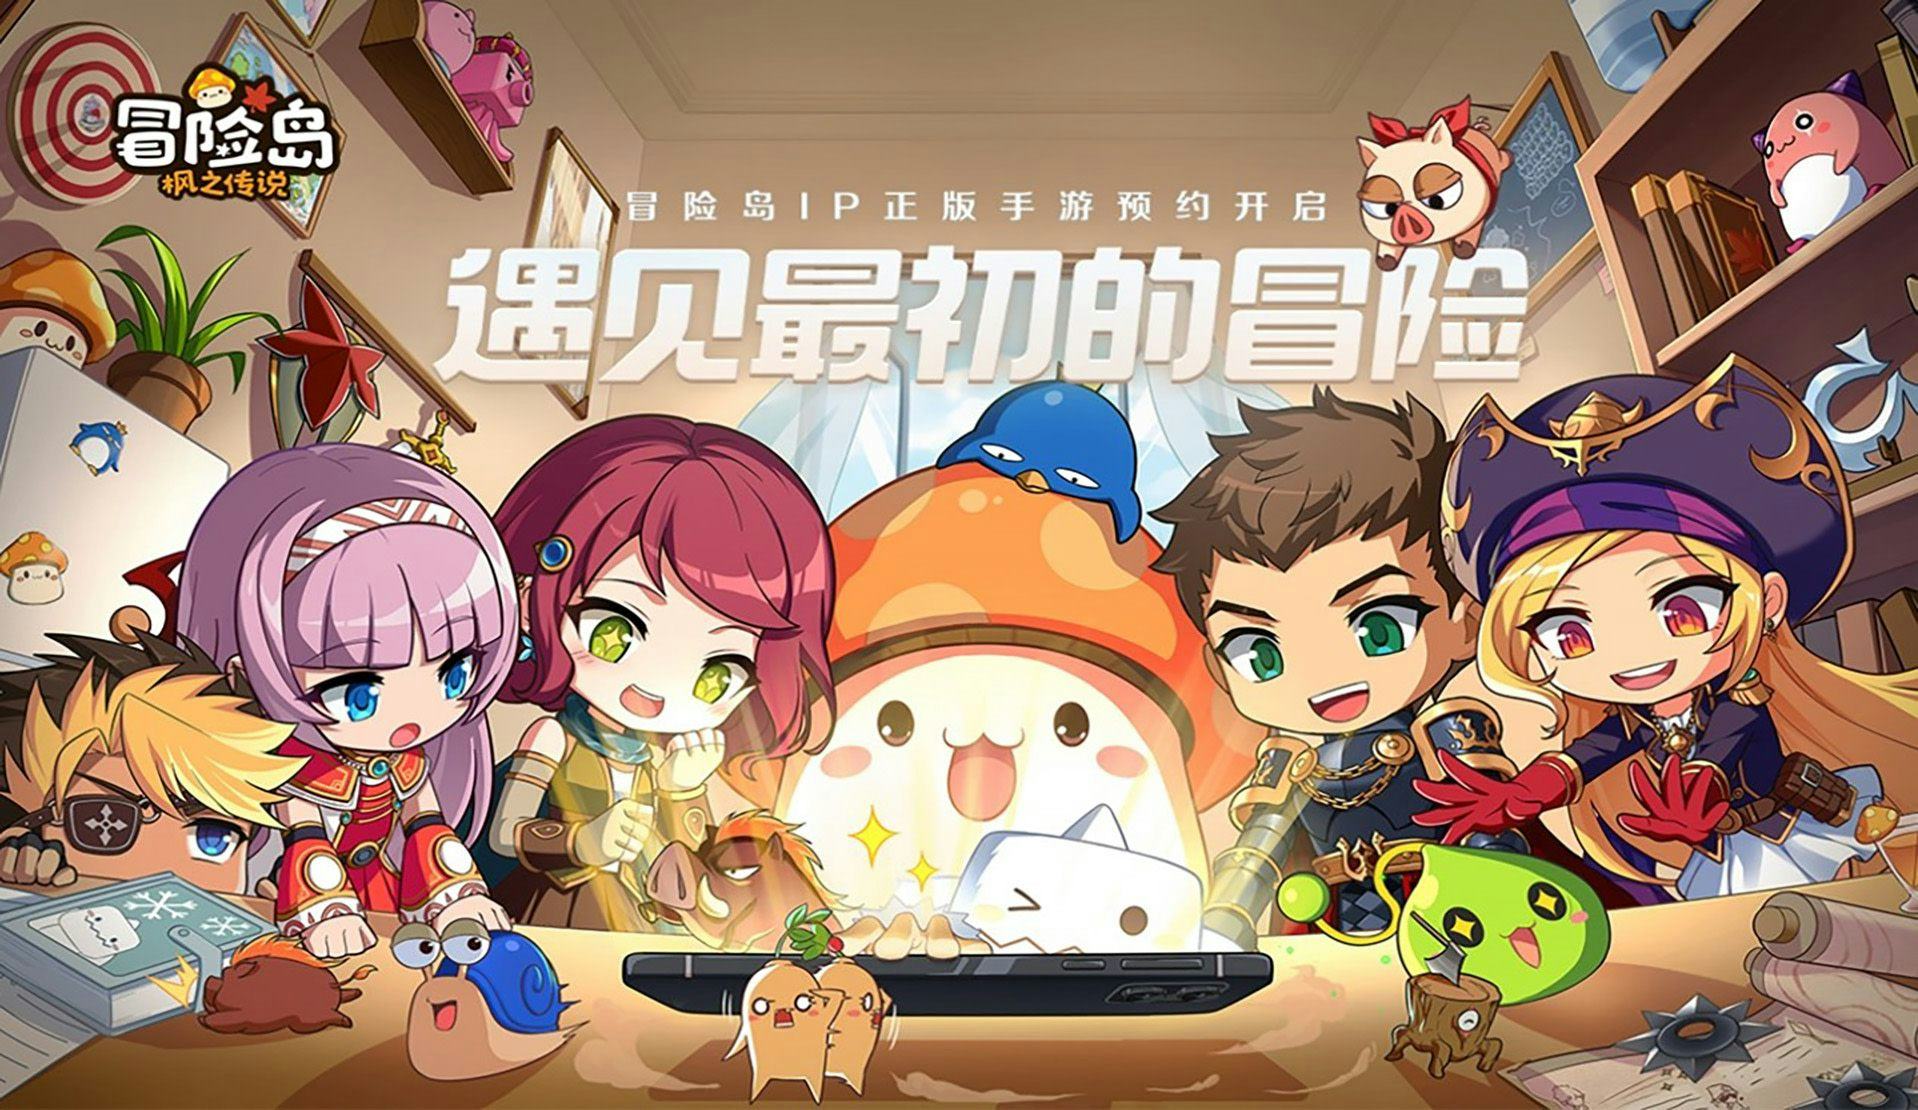 MapleStory M Surpasses $50 Million in China and Web3 IP